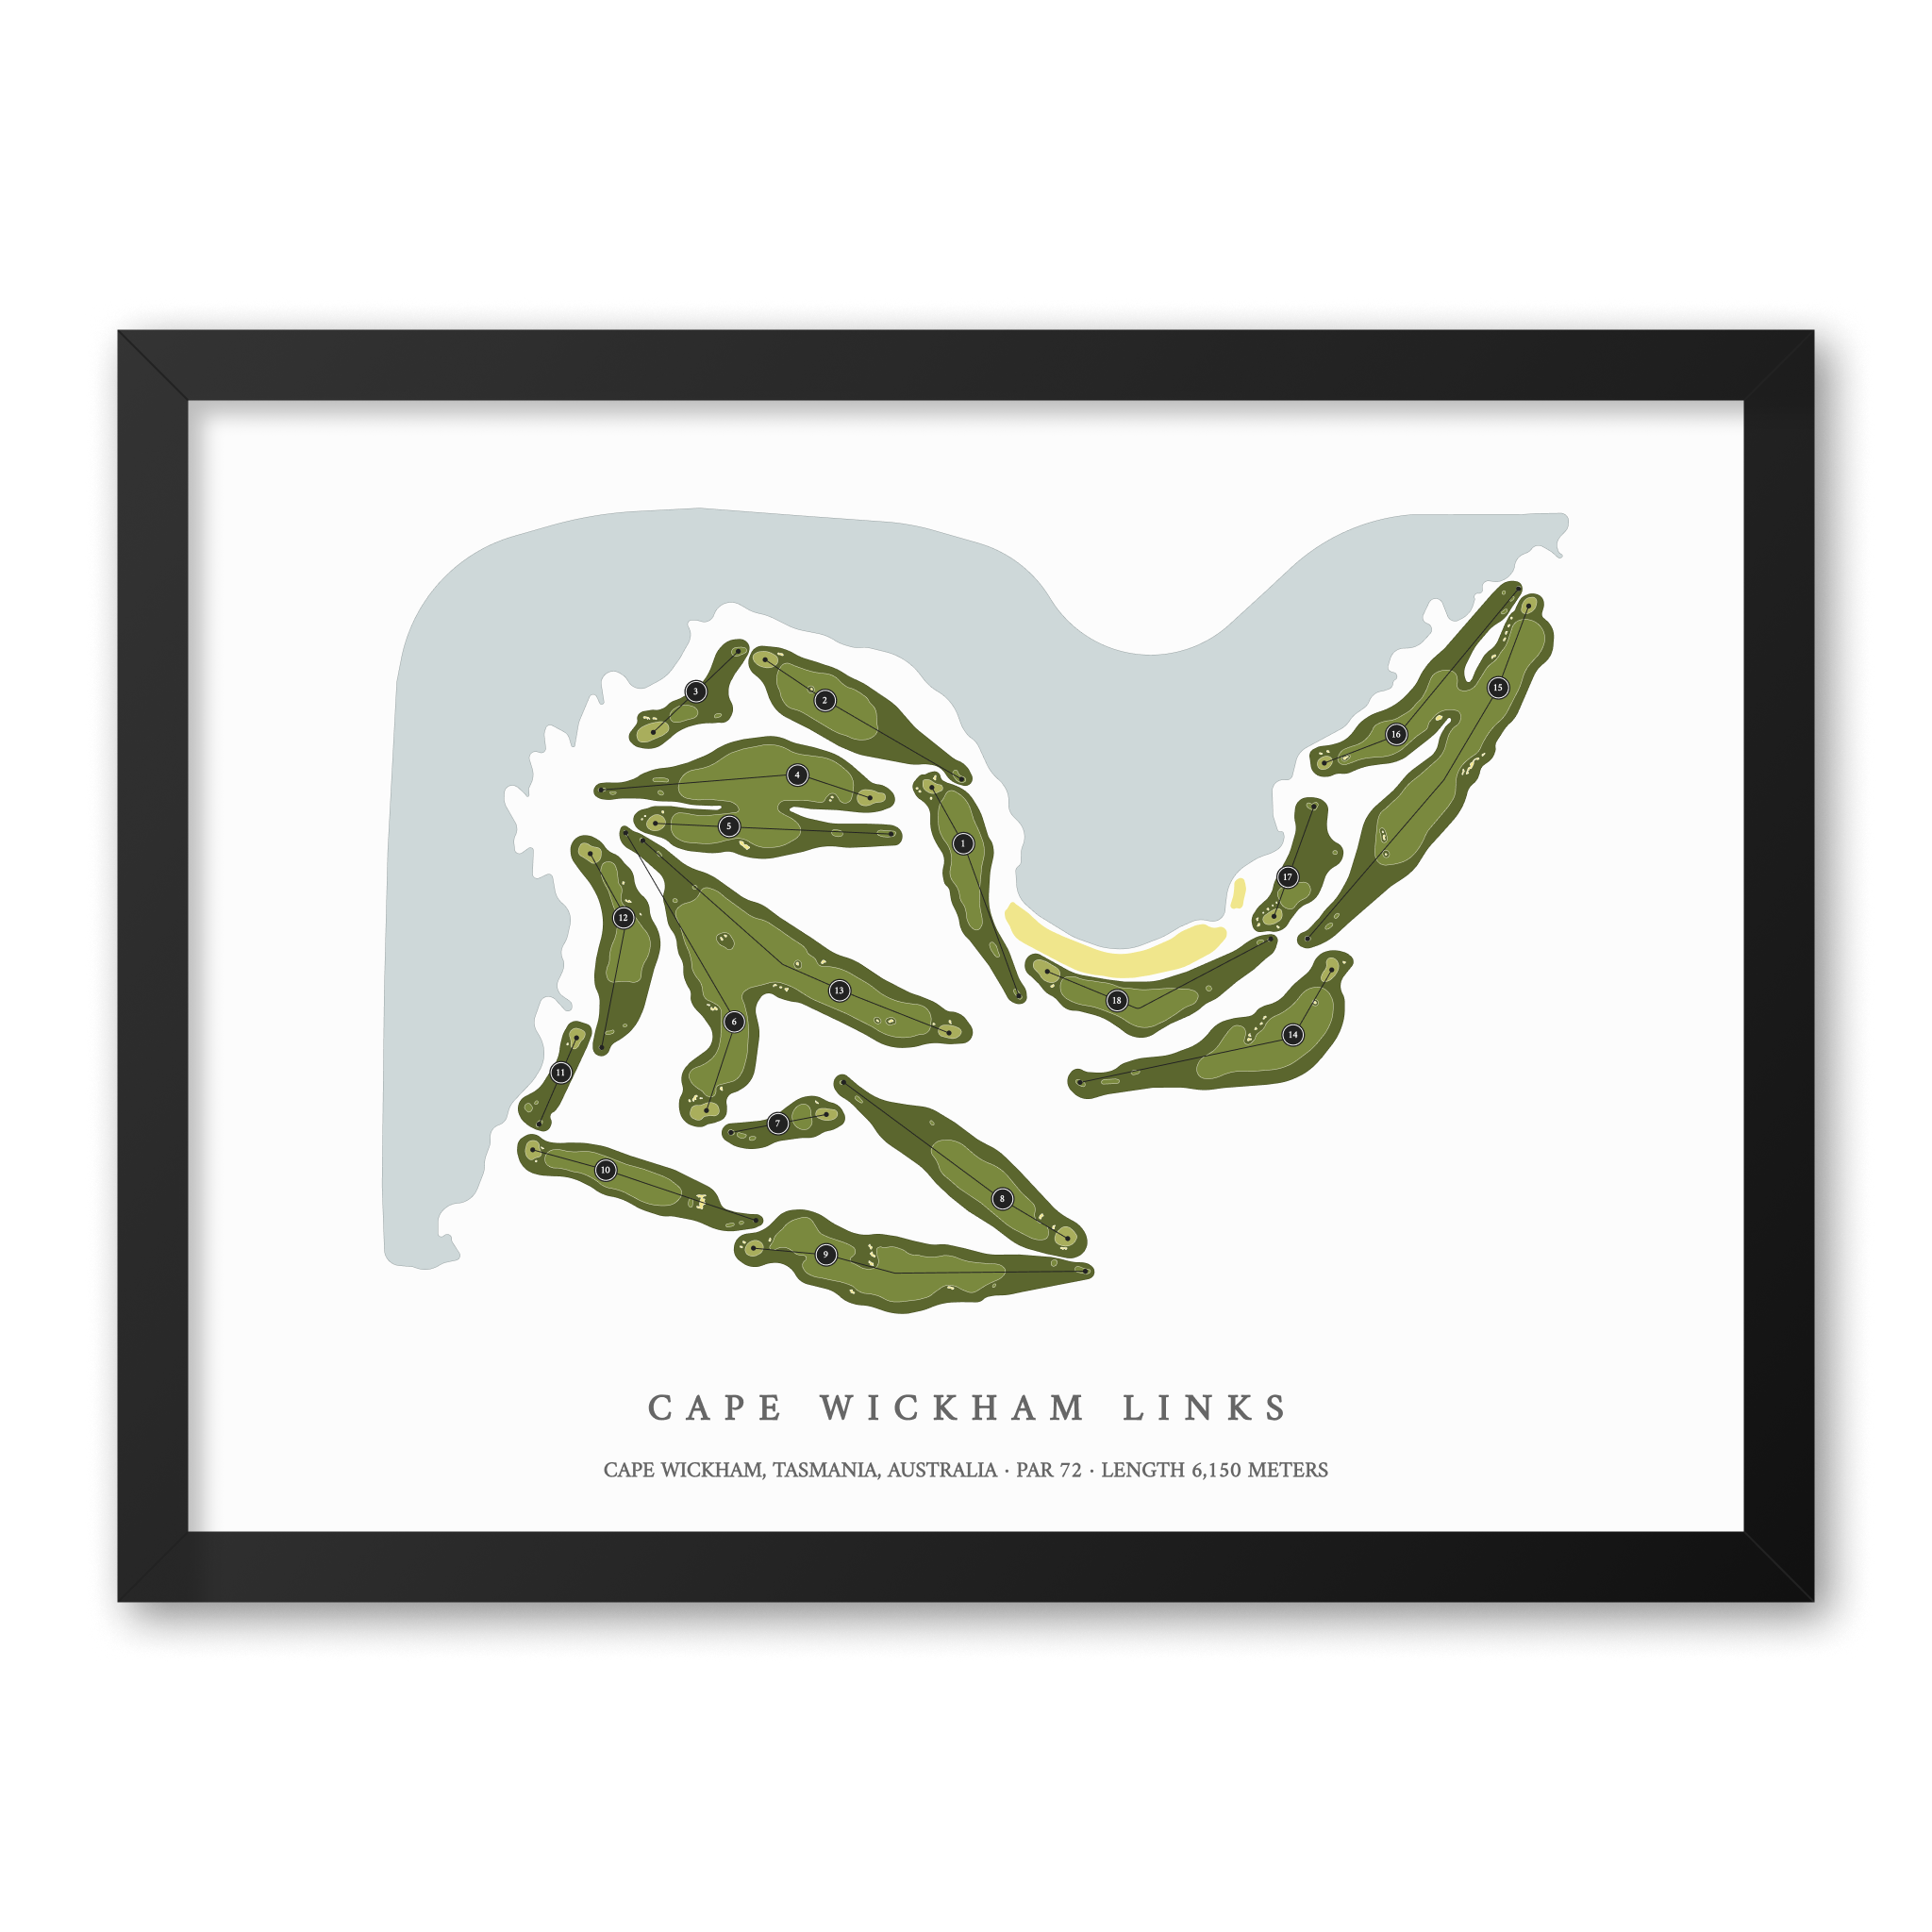 Cape Wickham Links | Golf Course Map | Black Frame With Hole Numbers #hole numbers_yes